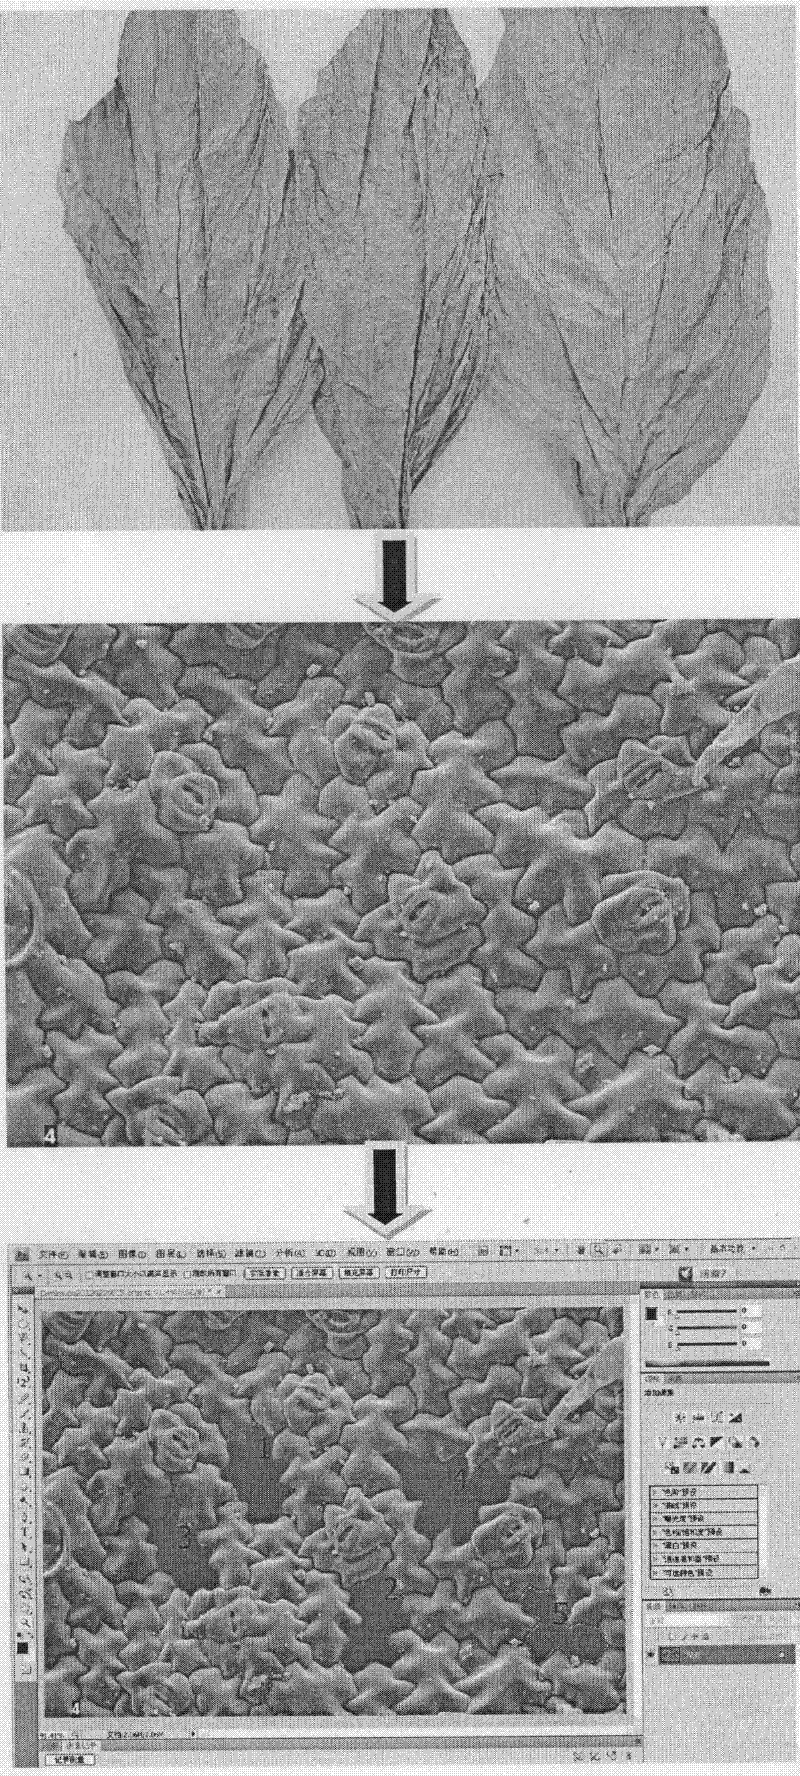 Method for quantificationally characterizing cell shape features of flue-cured tobacco leaves by utilizing Photoshop software